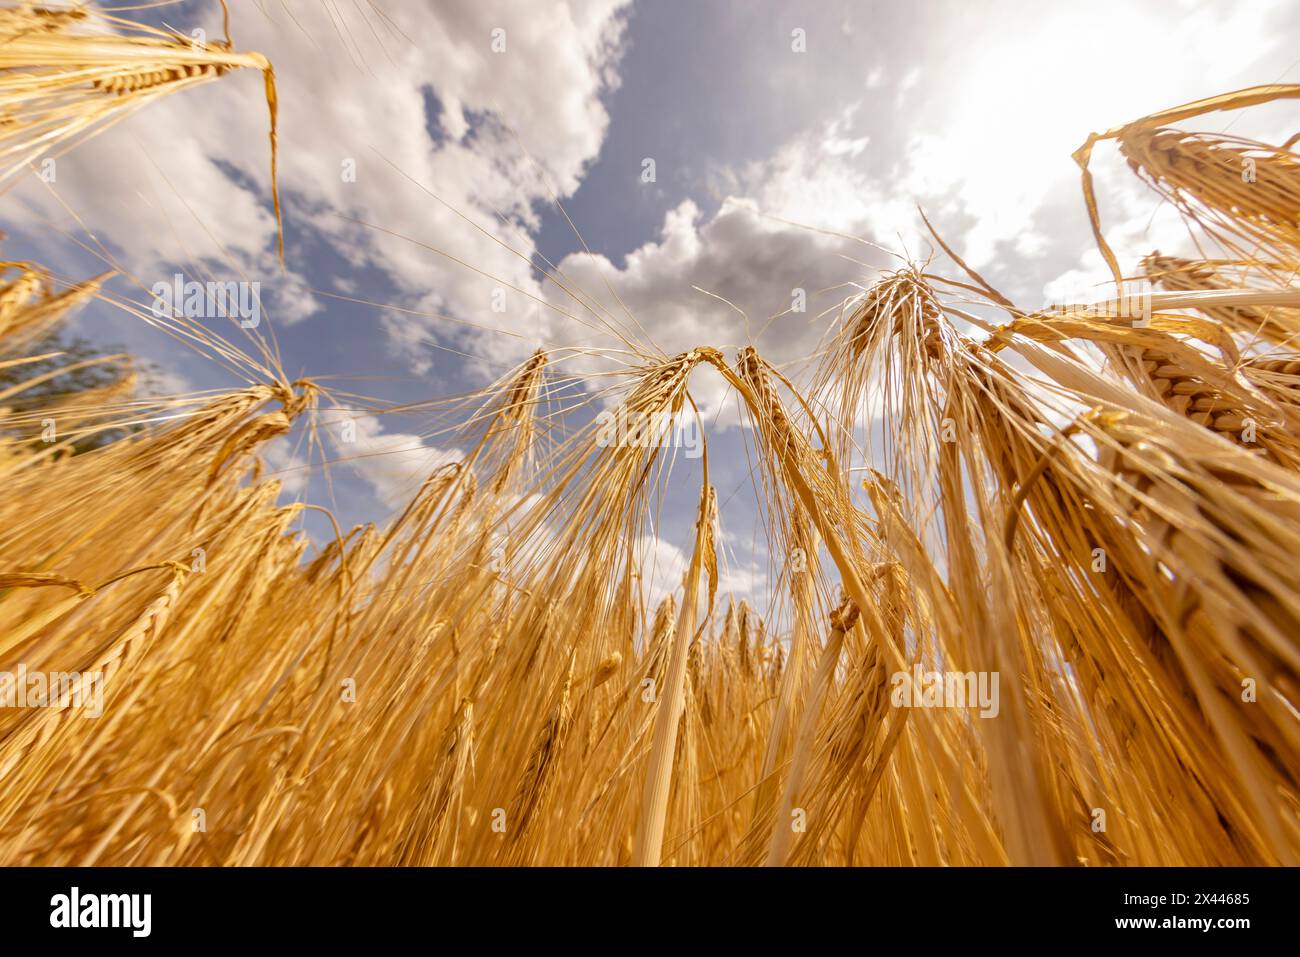 Golden grain field with Barley under a sunny sky with clouds, Cologne, North Rhine-Westphalia, Germany Stock Photo